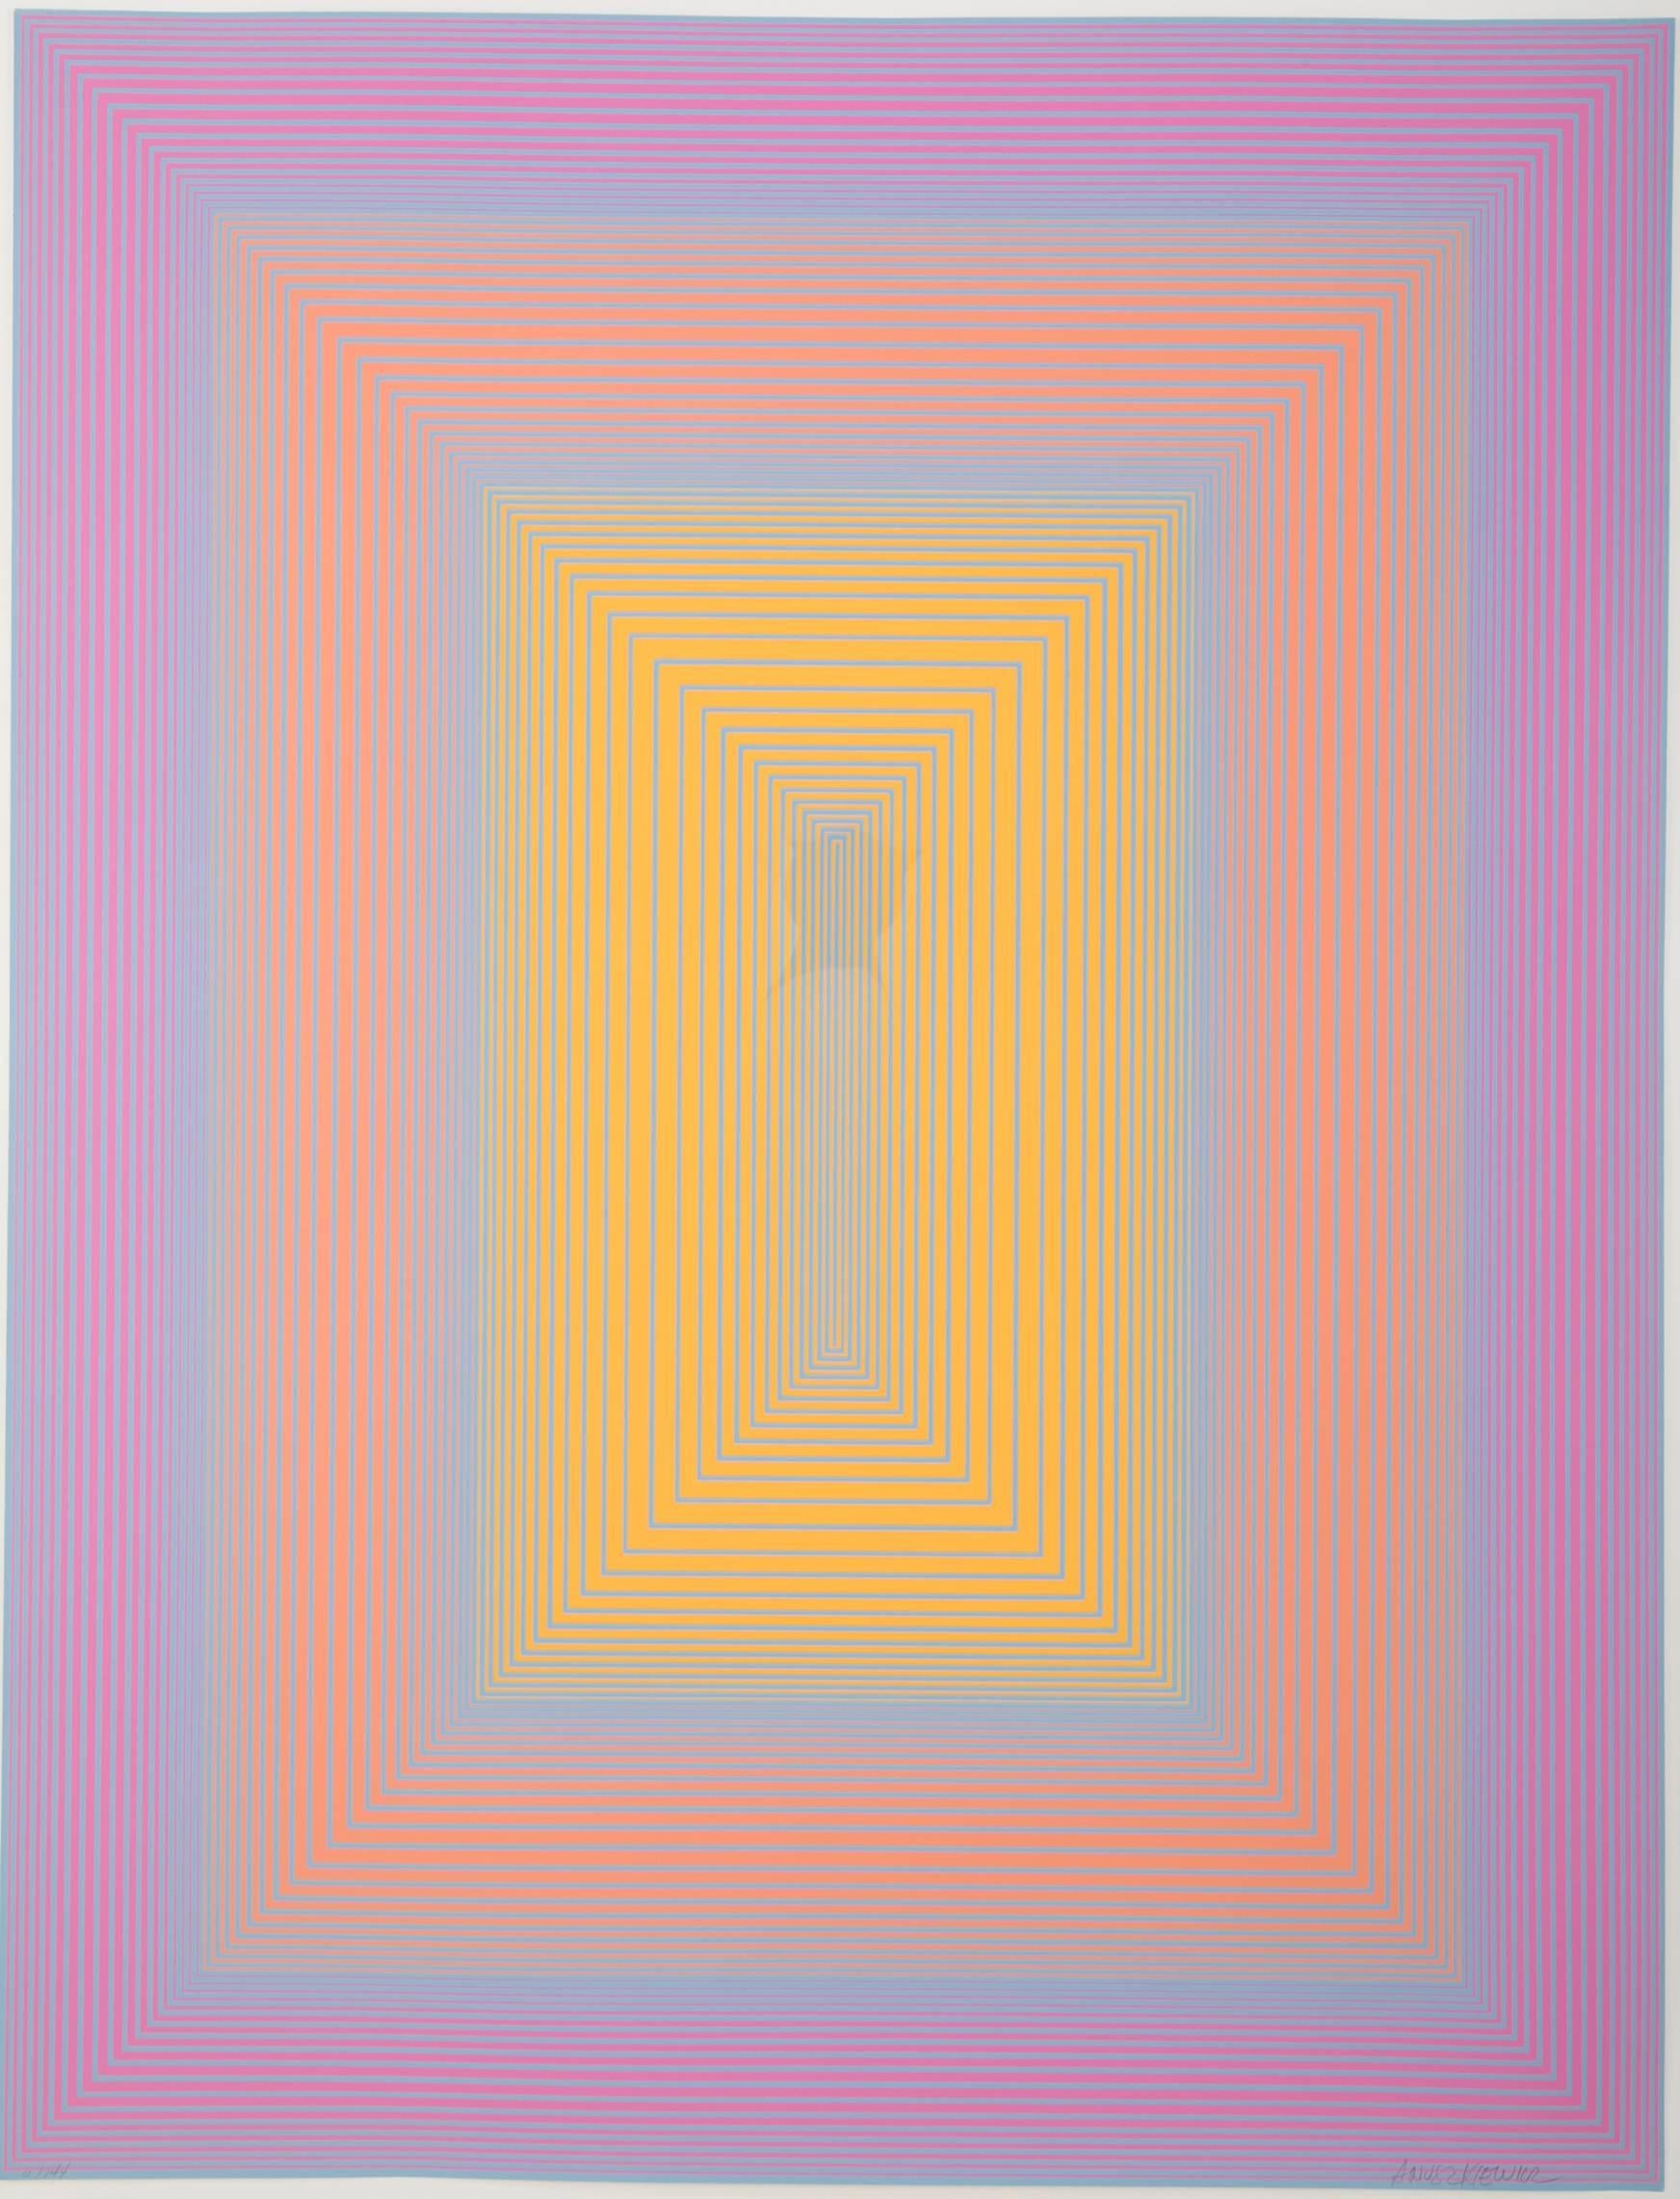 Color screenprint on paper by Richard Anuszkiewicz (American. b.1930). Blue, purple, yellow and orange colors. Signed and numbered 9/144.